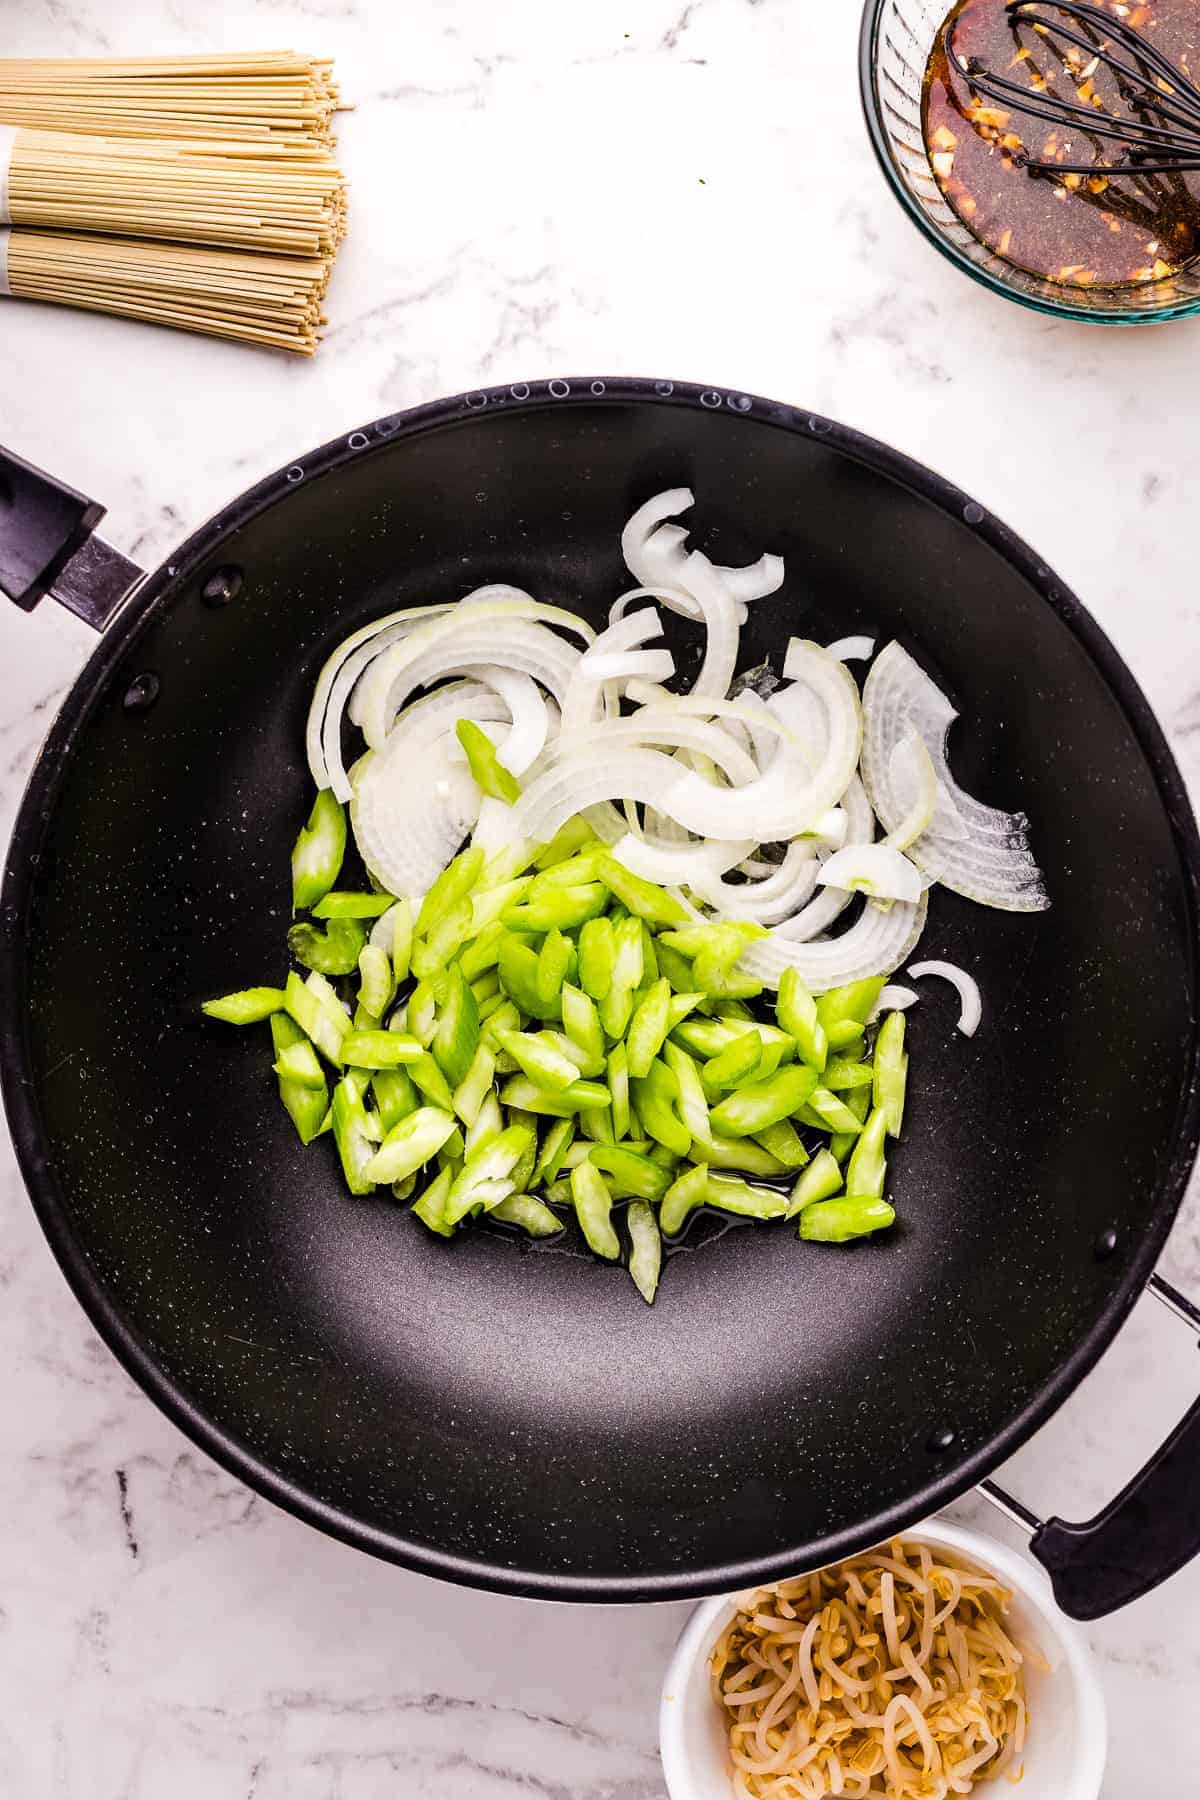 Sliced cabbage and onions in black skillet